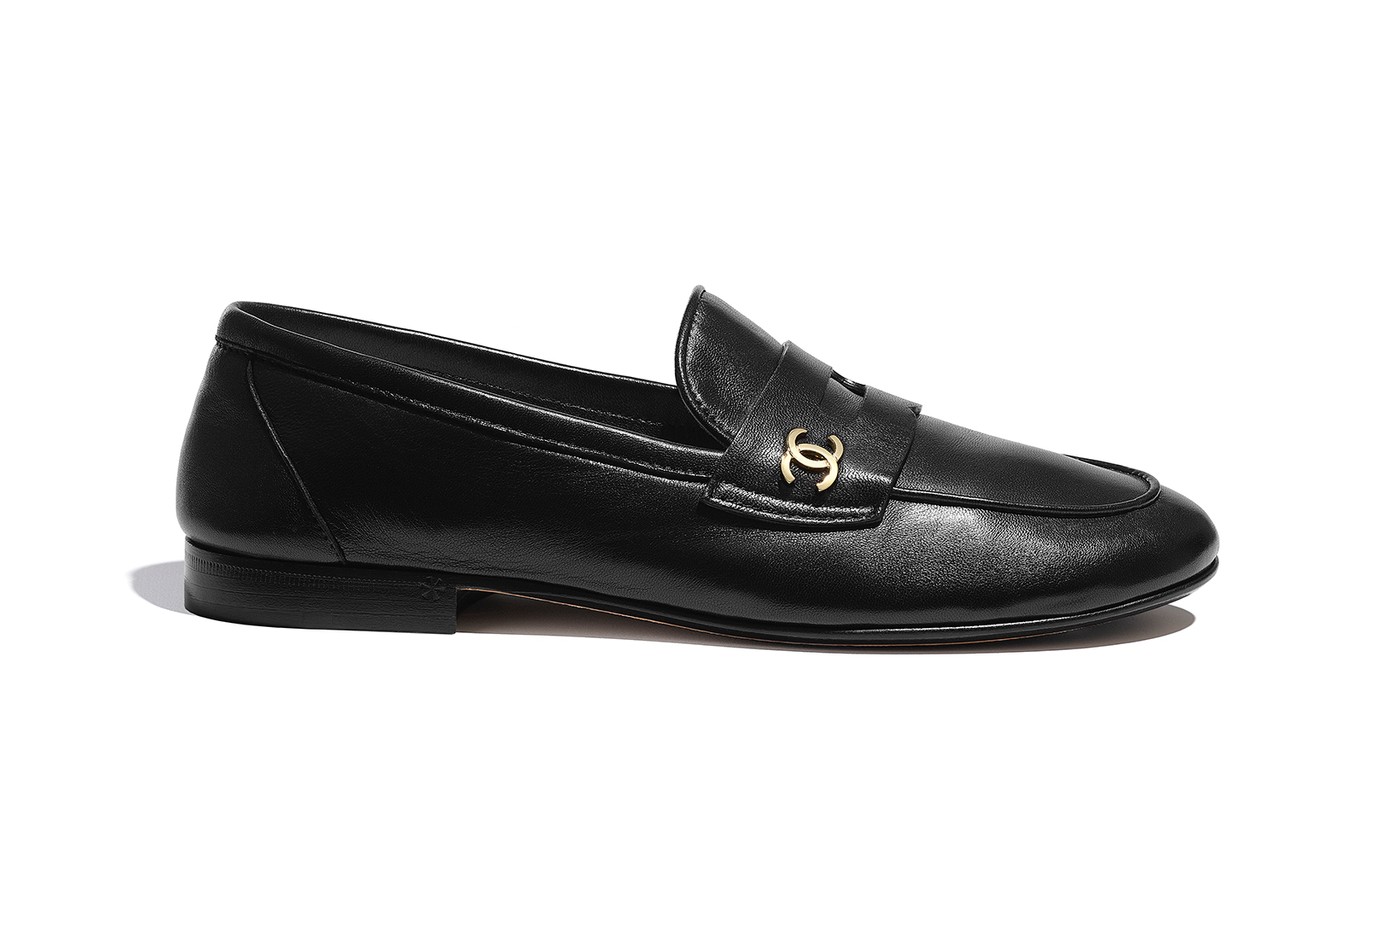 chanel penny loafer spring summer 2021 collection shoes release